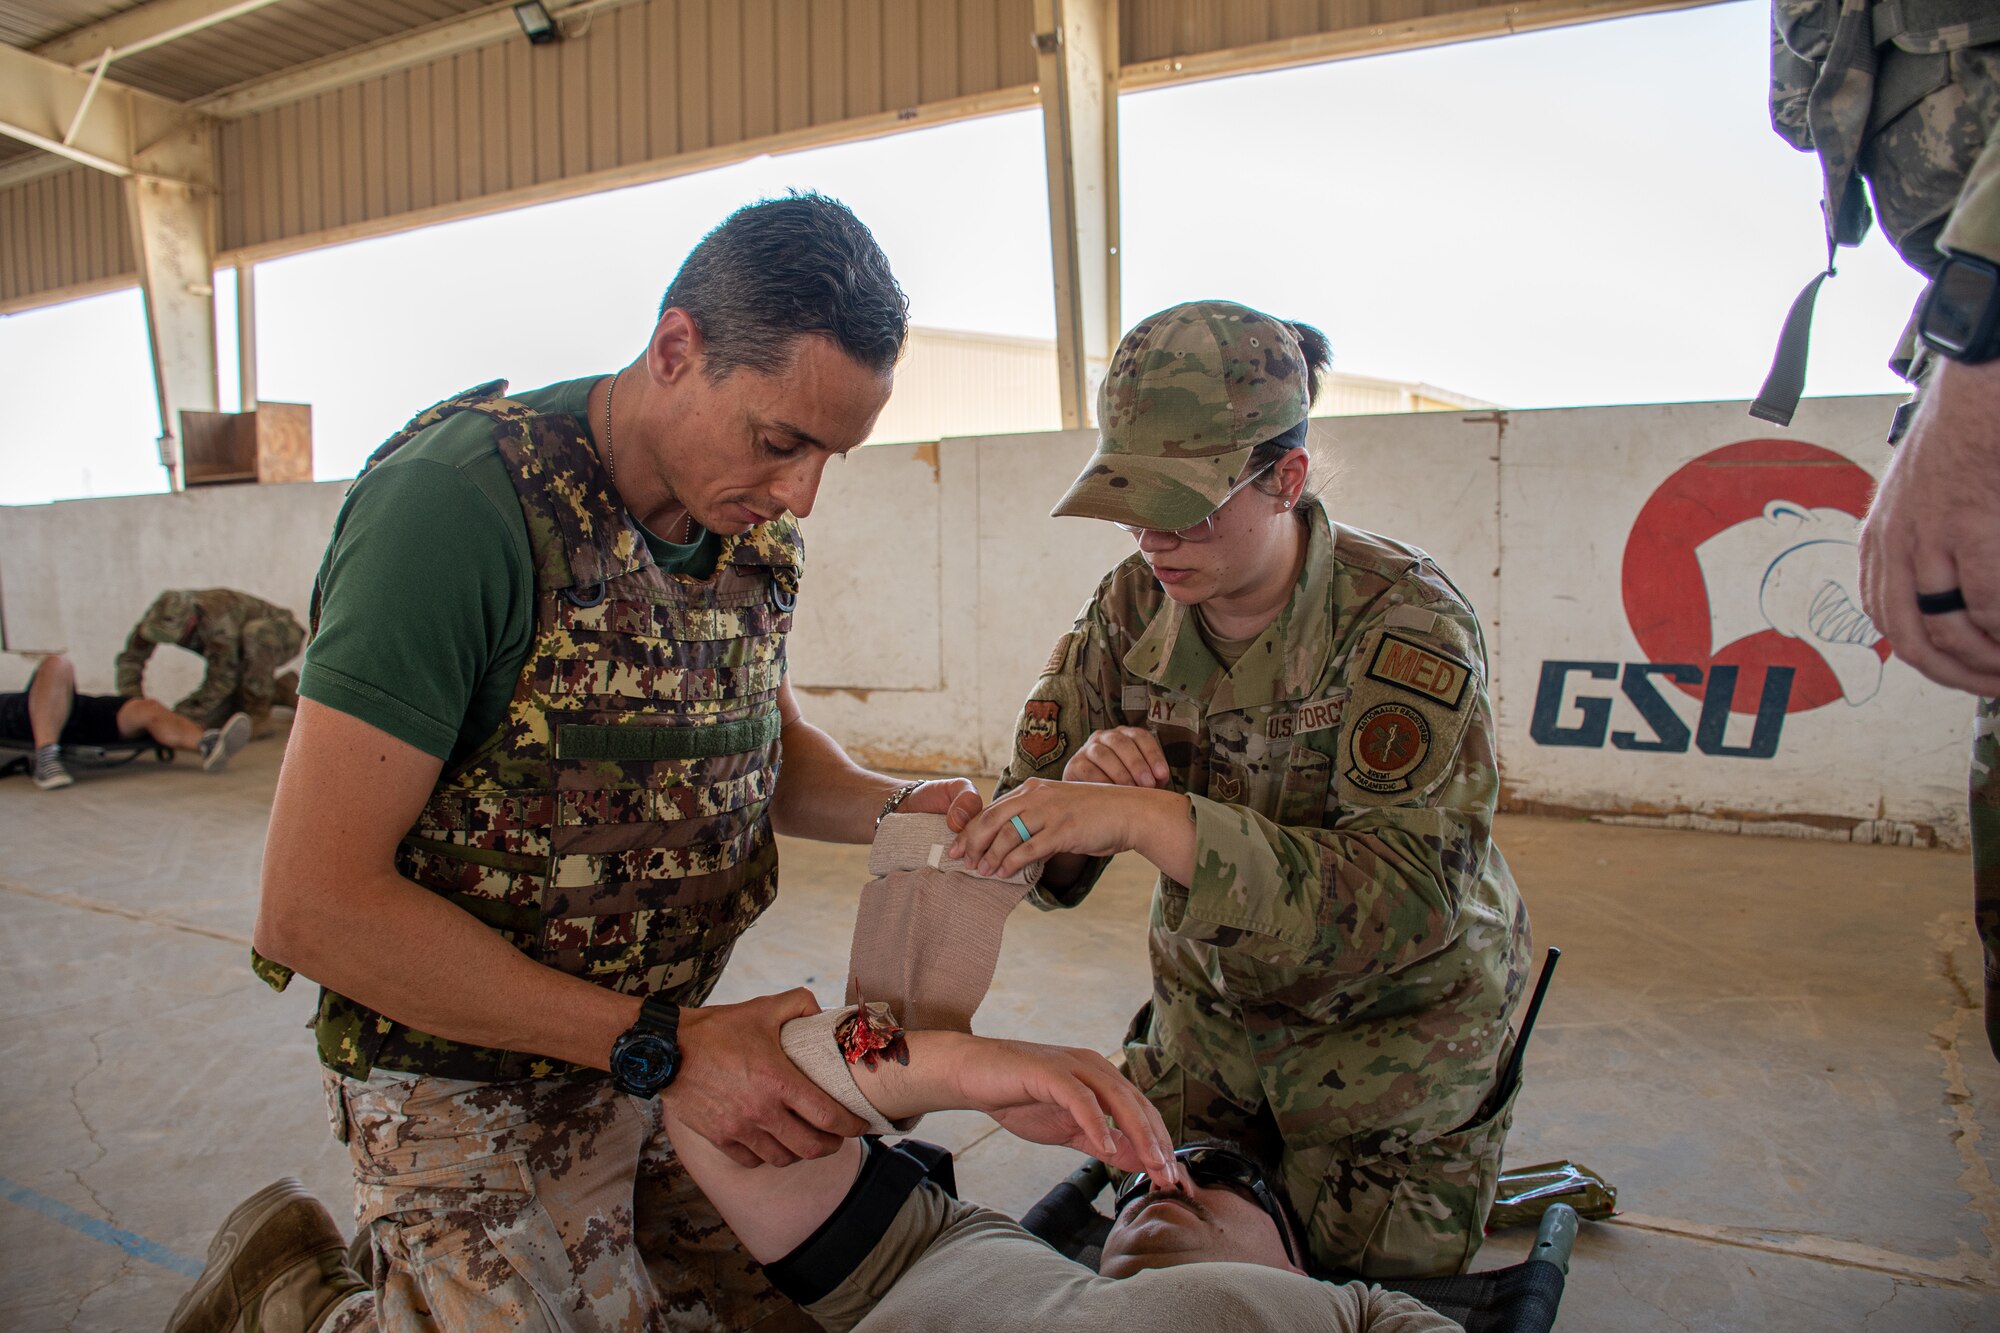 The 386th Expeditionary Medical Group hosted a joint coalition tactical combat casualty care all service members course.  TCCC was designed to lessen combat deaths by providing trauma stabilization techniques for the wounded to survive long enough to receive life-saving treatment at a medical facility.